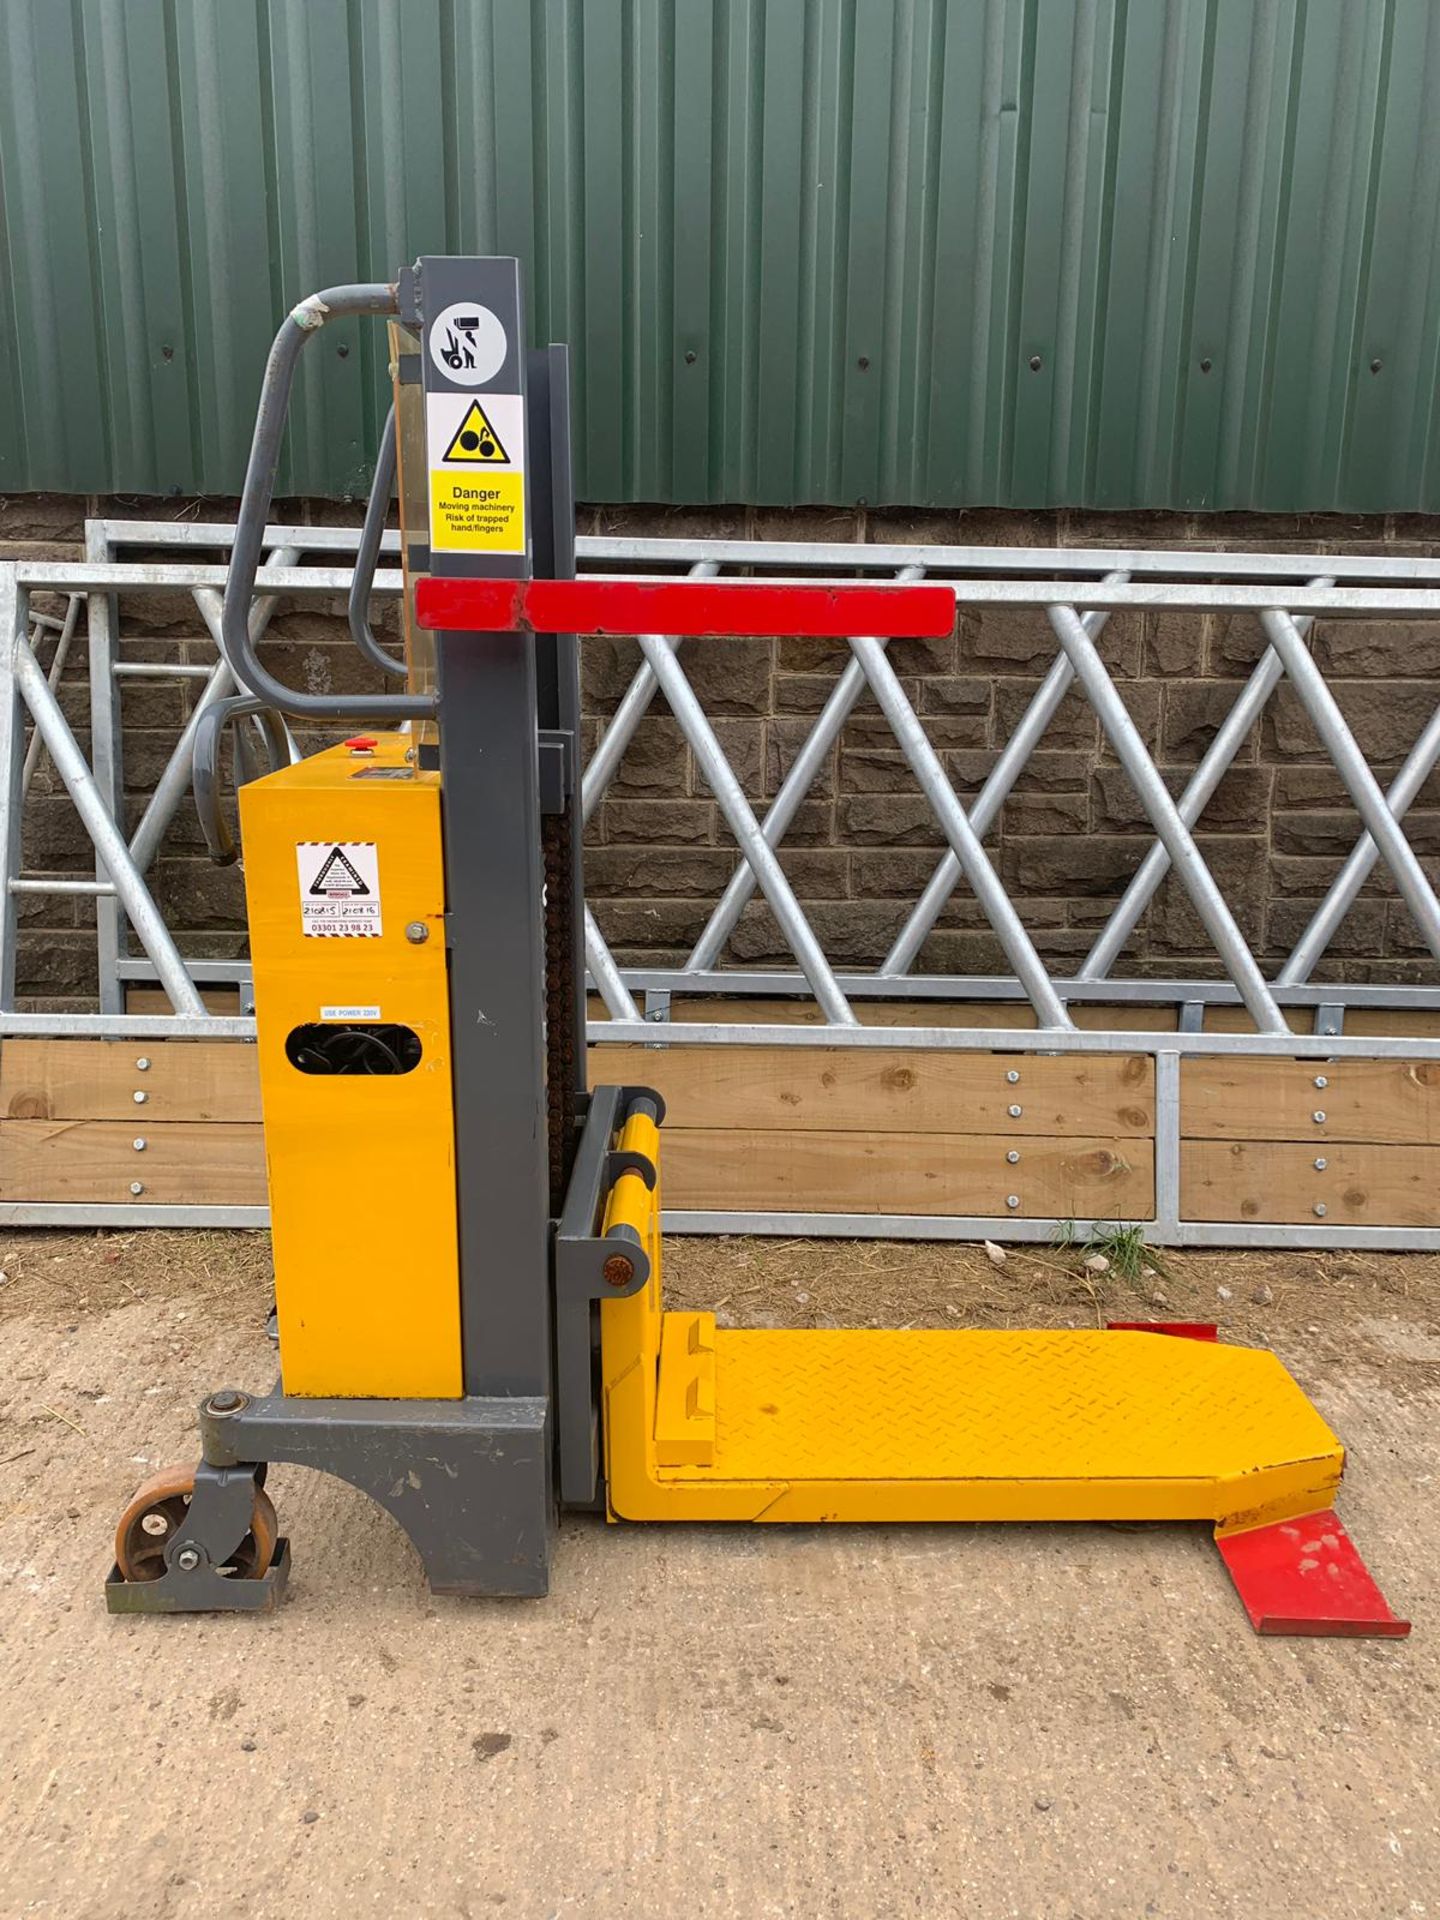 WARRIOR YM250 ELECTRIC PALLET TRUCK, WEIGHT 270 KGS, LIFT HEIGHT 1M, YEAR 2013 *PLUS VAT* - Image 7 of 9